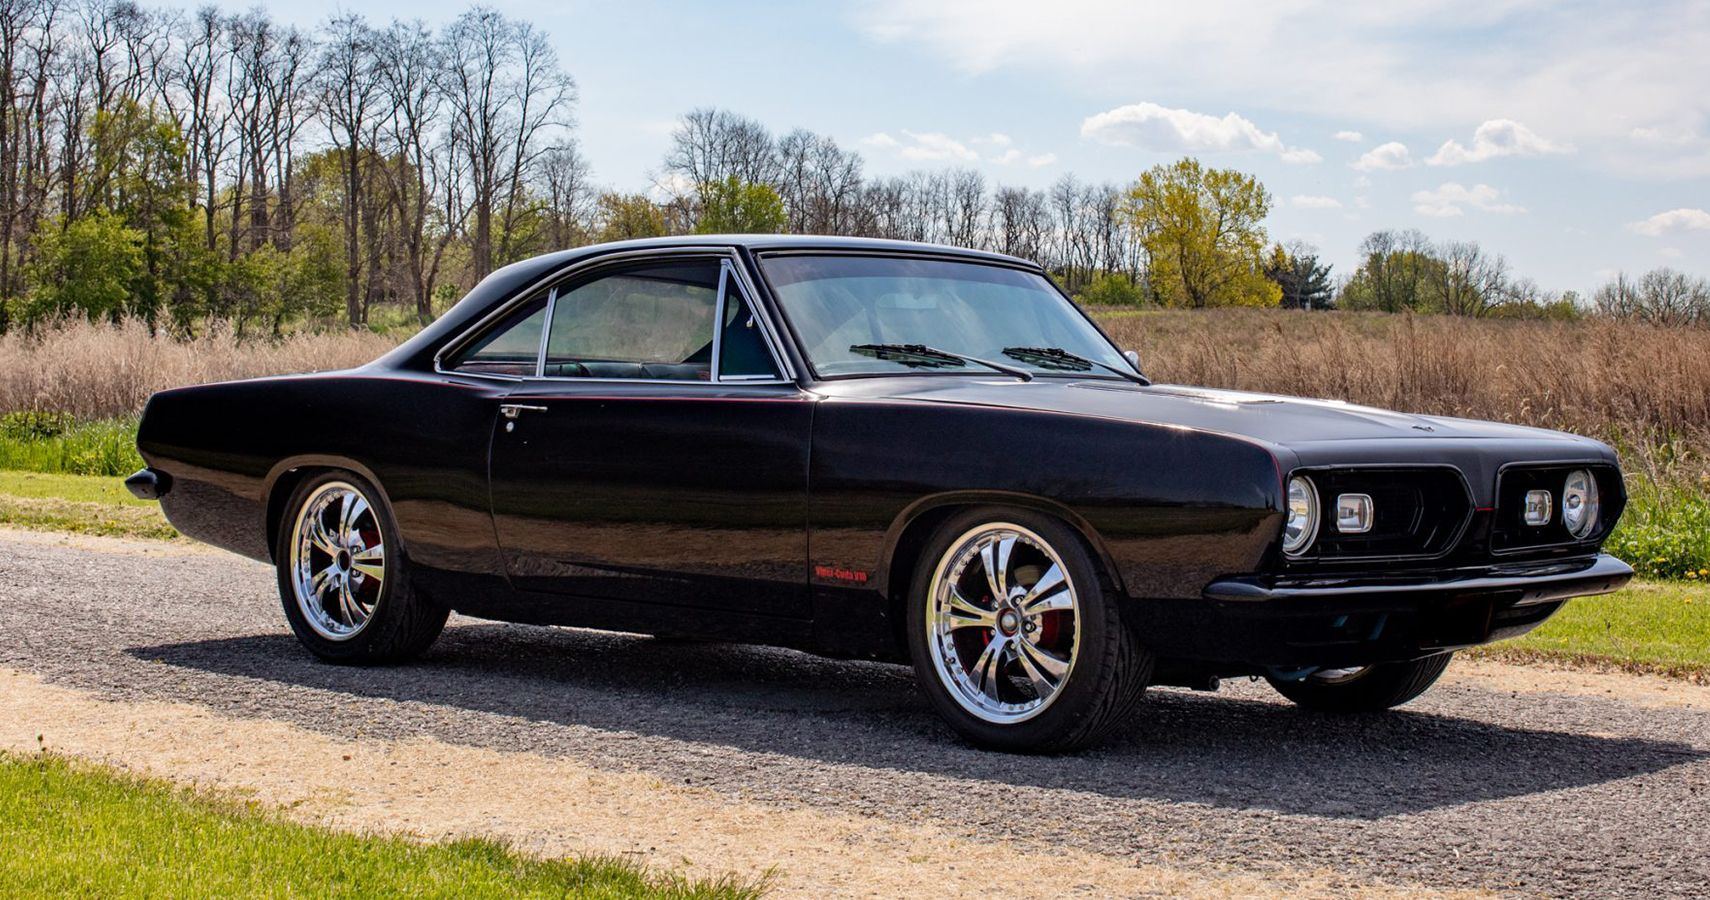 This Viper-Powered 1967 Plymouth Barracuda Is A Wild Muscle Car Build